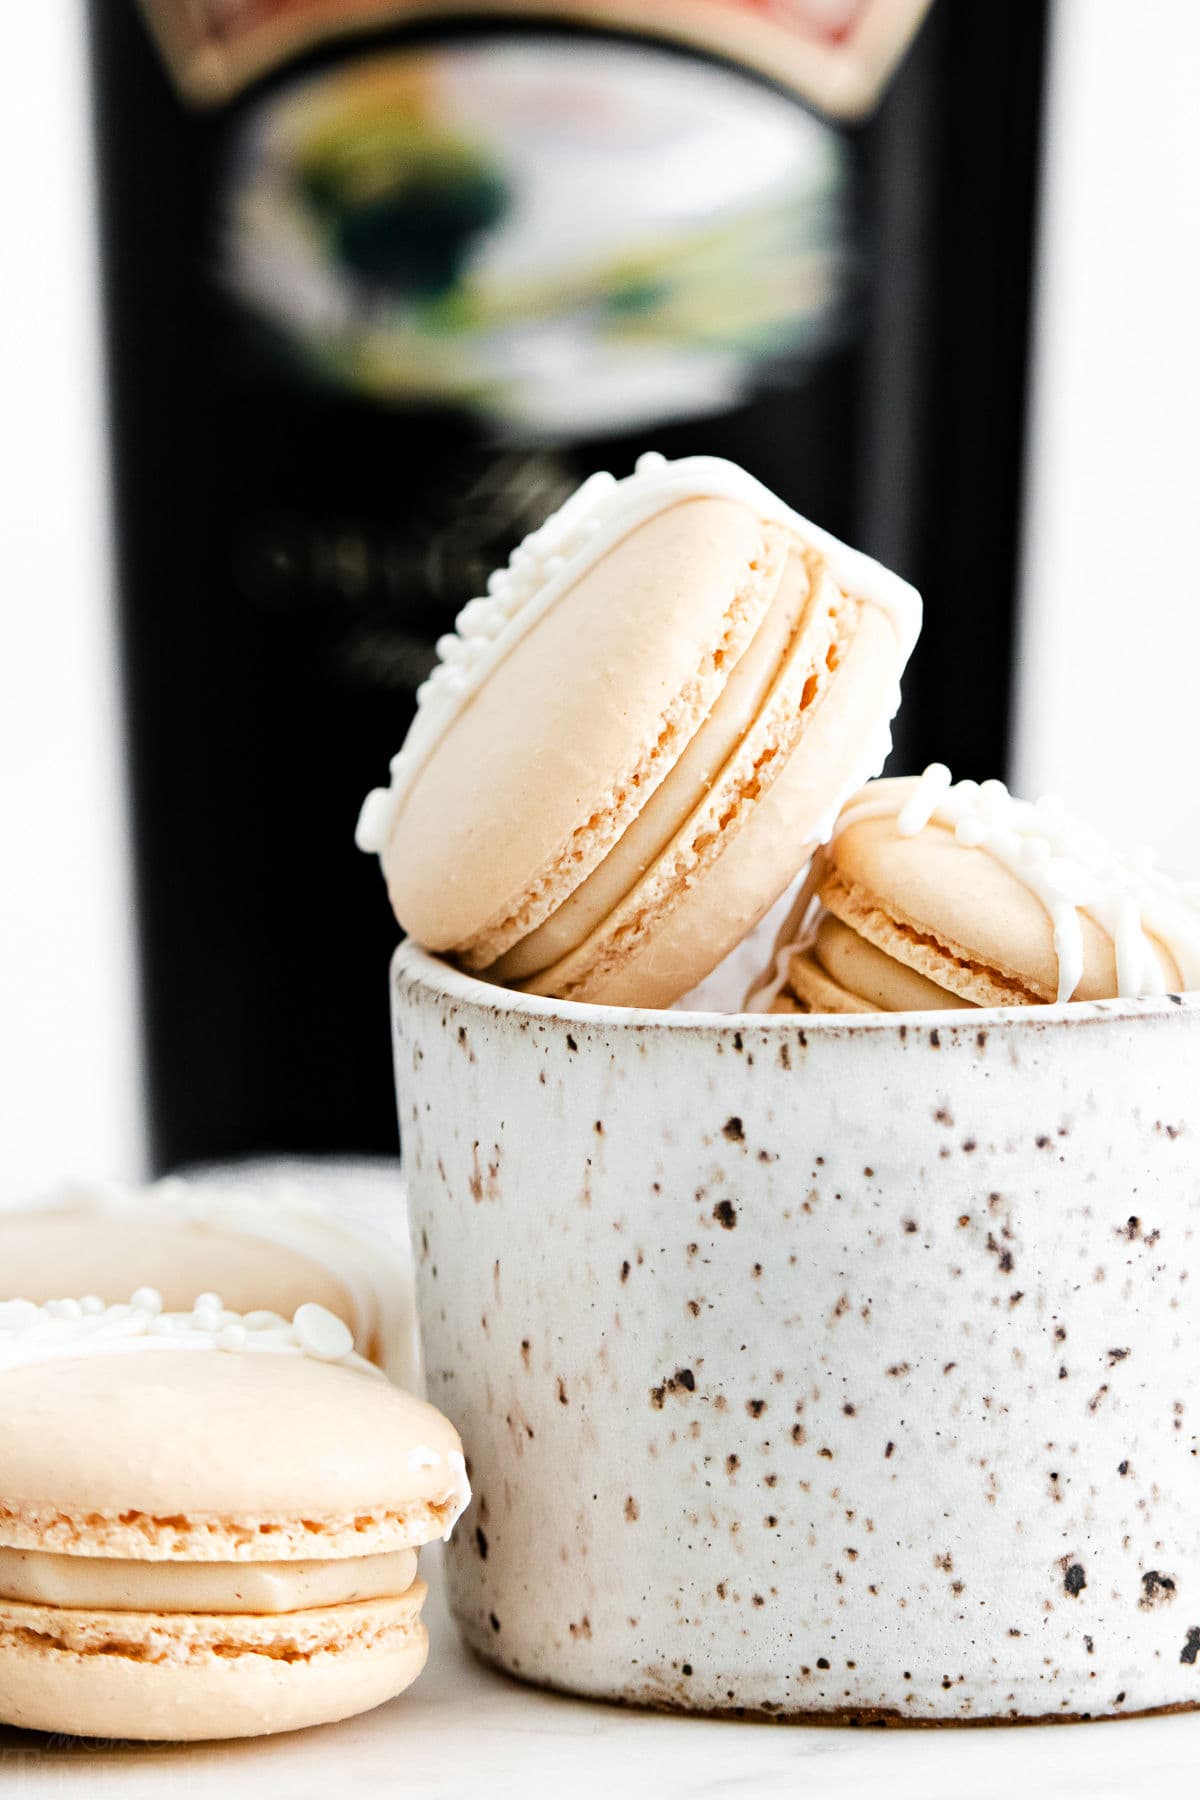 macarons with a creamy Irish cream filling in small white bowl with bottle of Bailey's Irish cream in background.